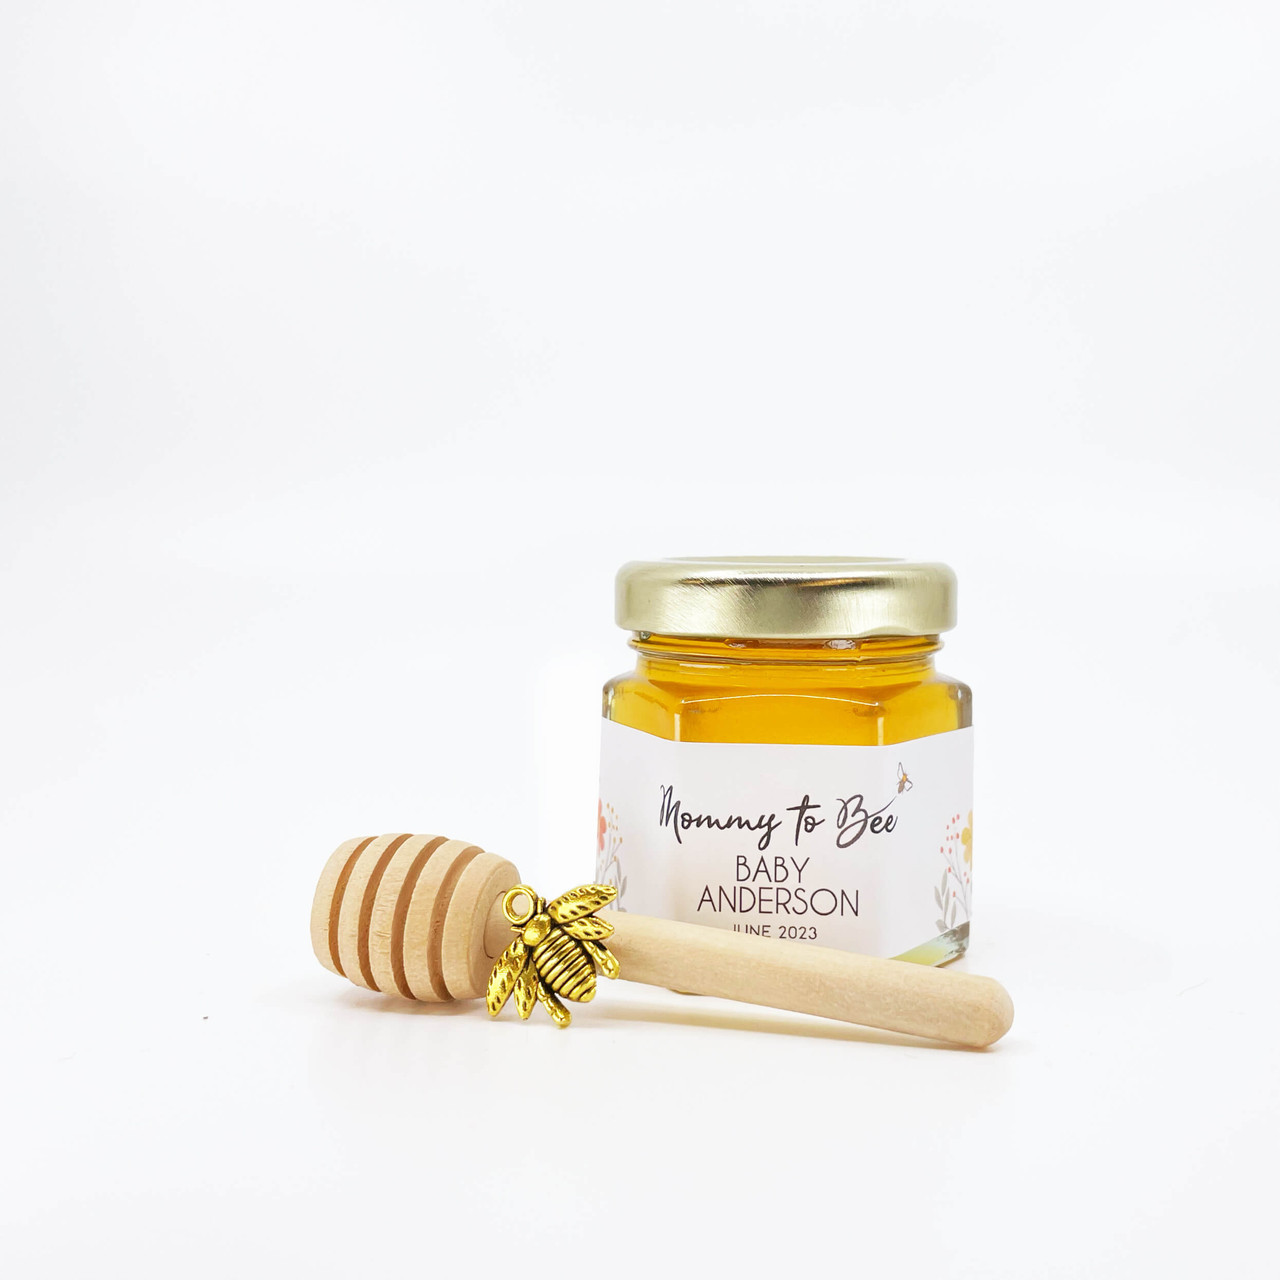 Mommy to Bee shower party favor gift